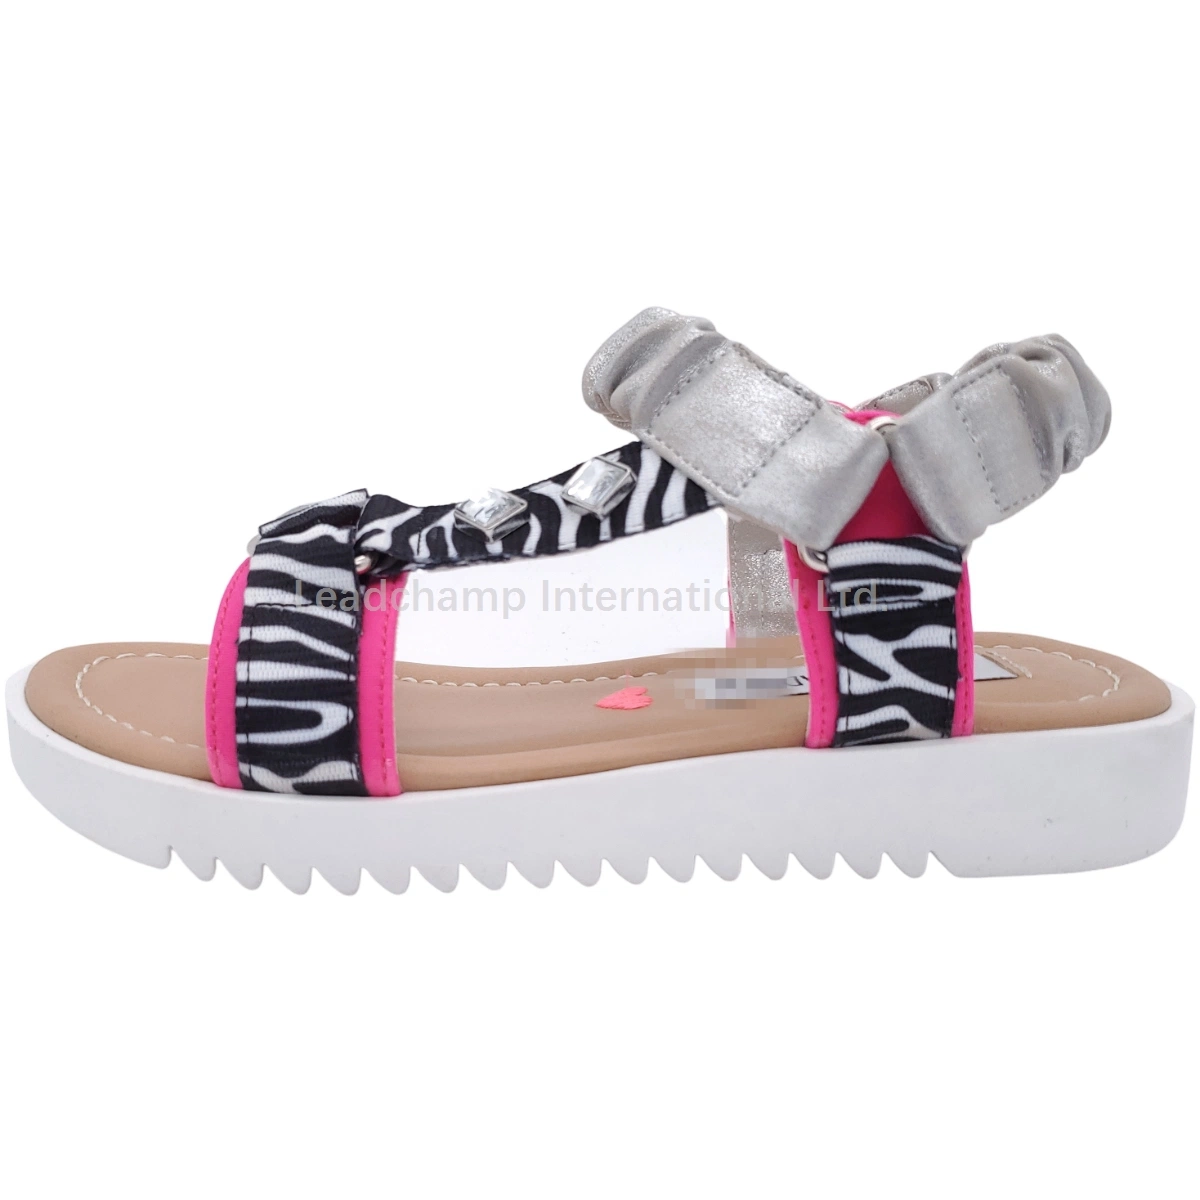 Fashionable Animal Print Textile Kids Casual Shoes Summer Sandals